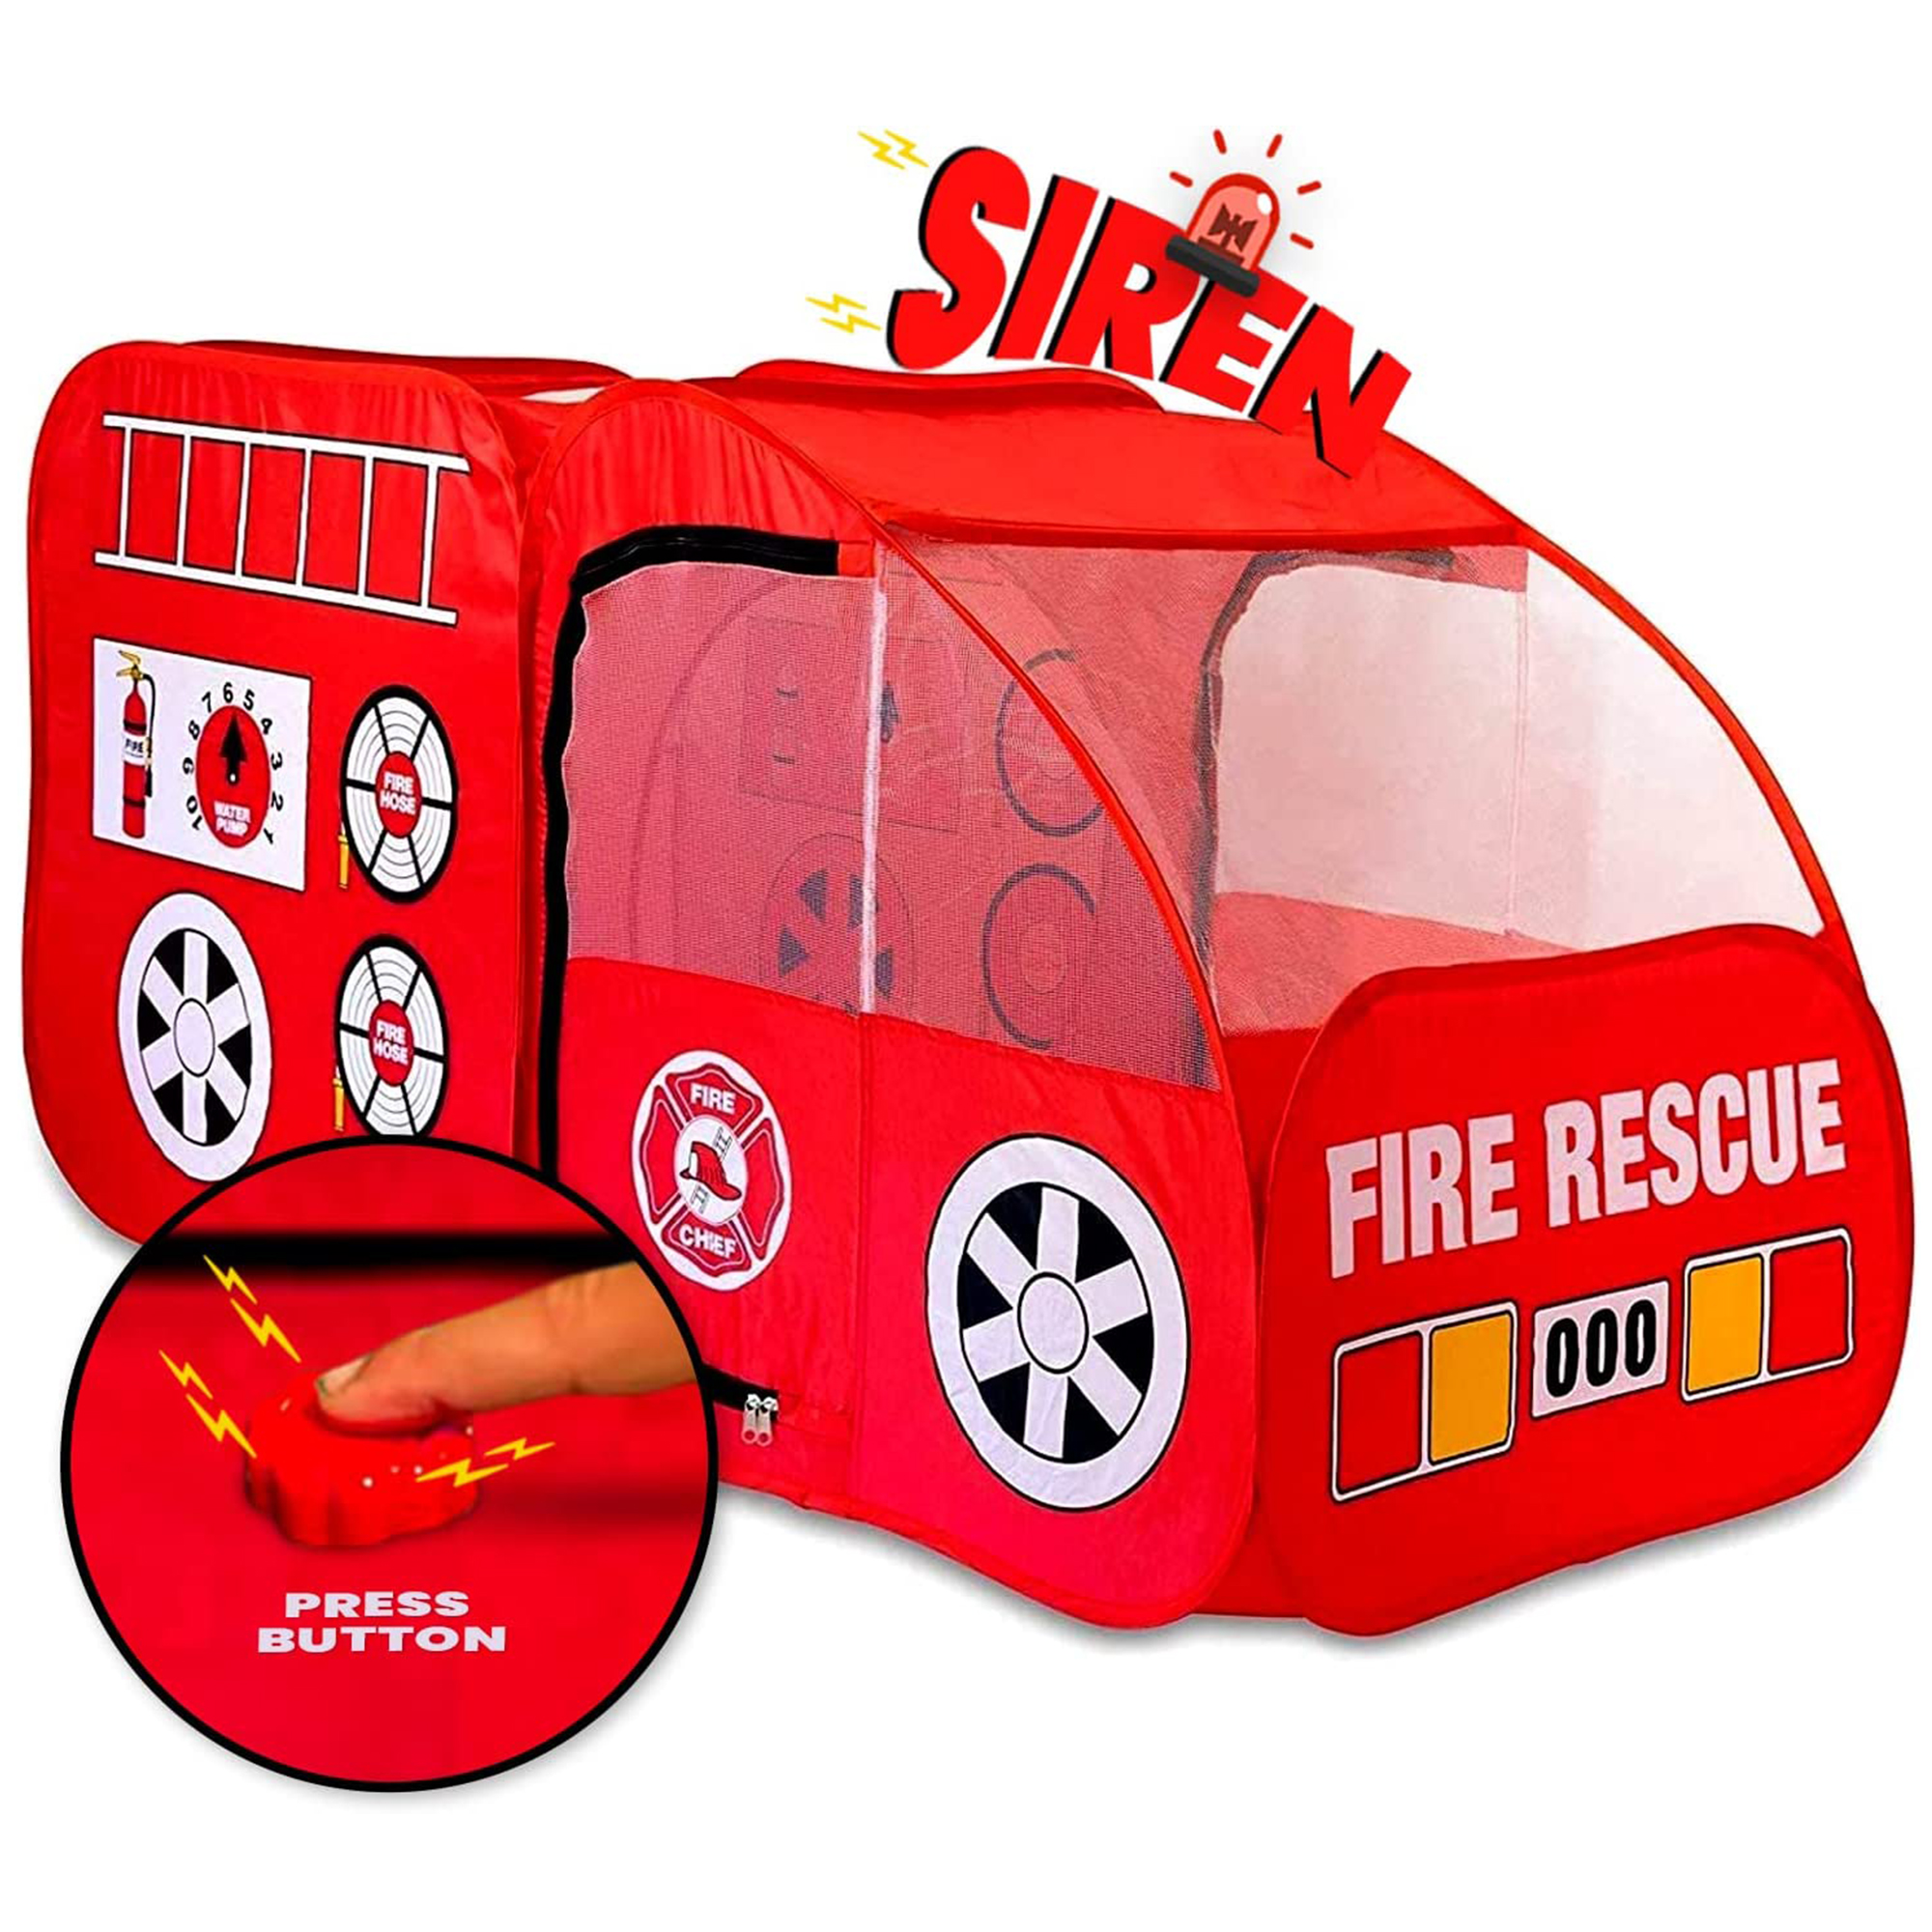 Kiddzery Pretend Playhouse Fire Truck Pop Up Play Tent for Kids with Siren Sound, Red - image 1 of 9